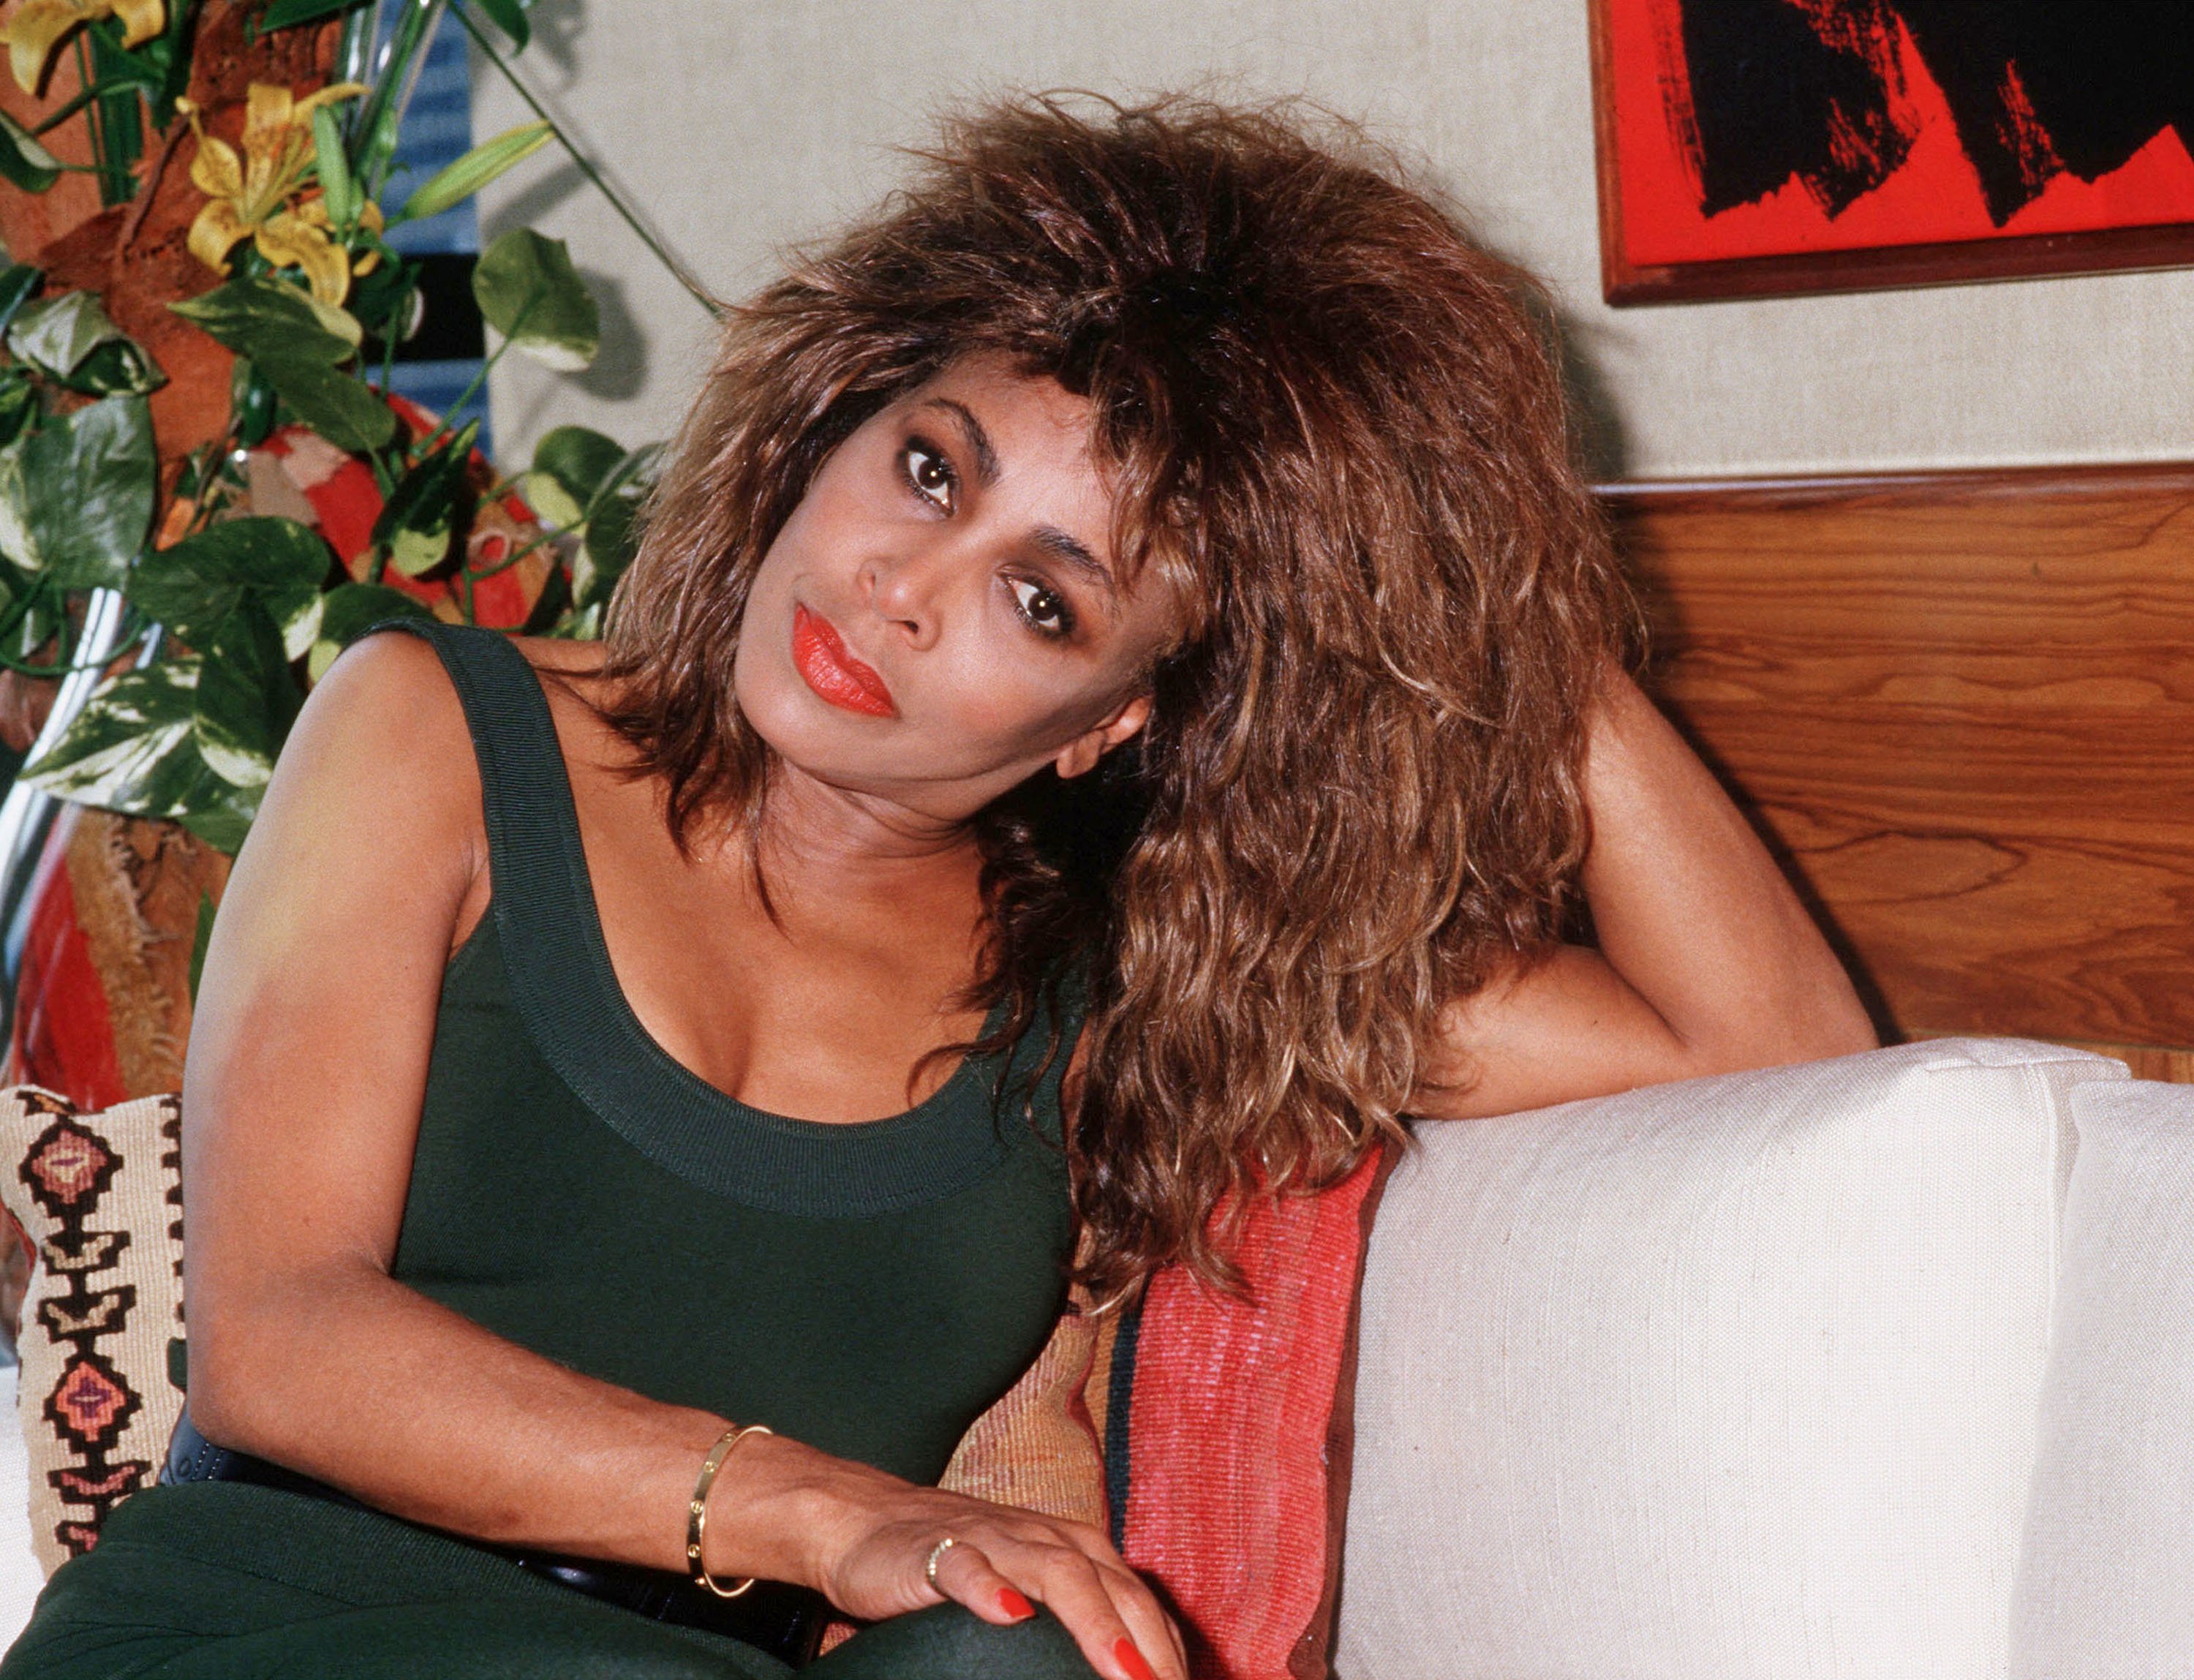 Tina Turner in Brasilien 1988. | Quelle: Getty Images